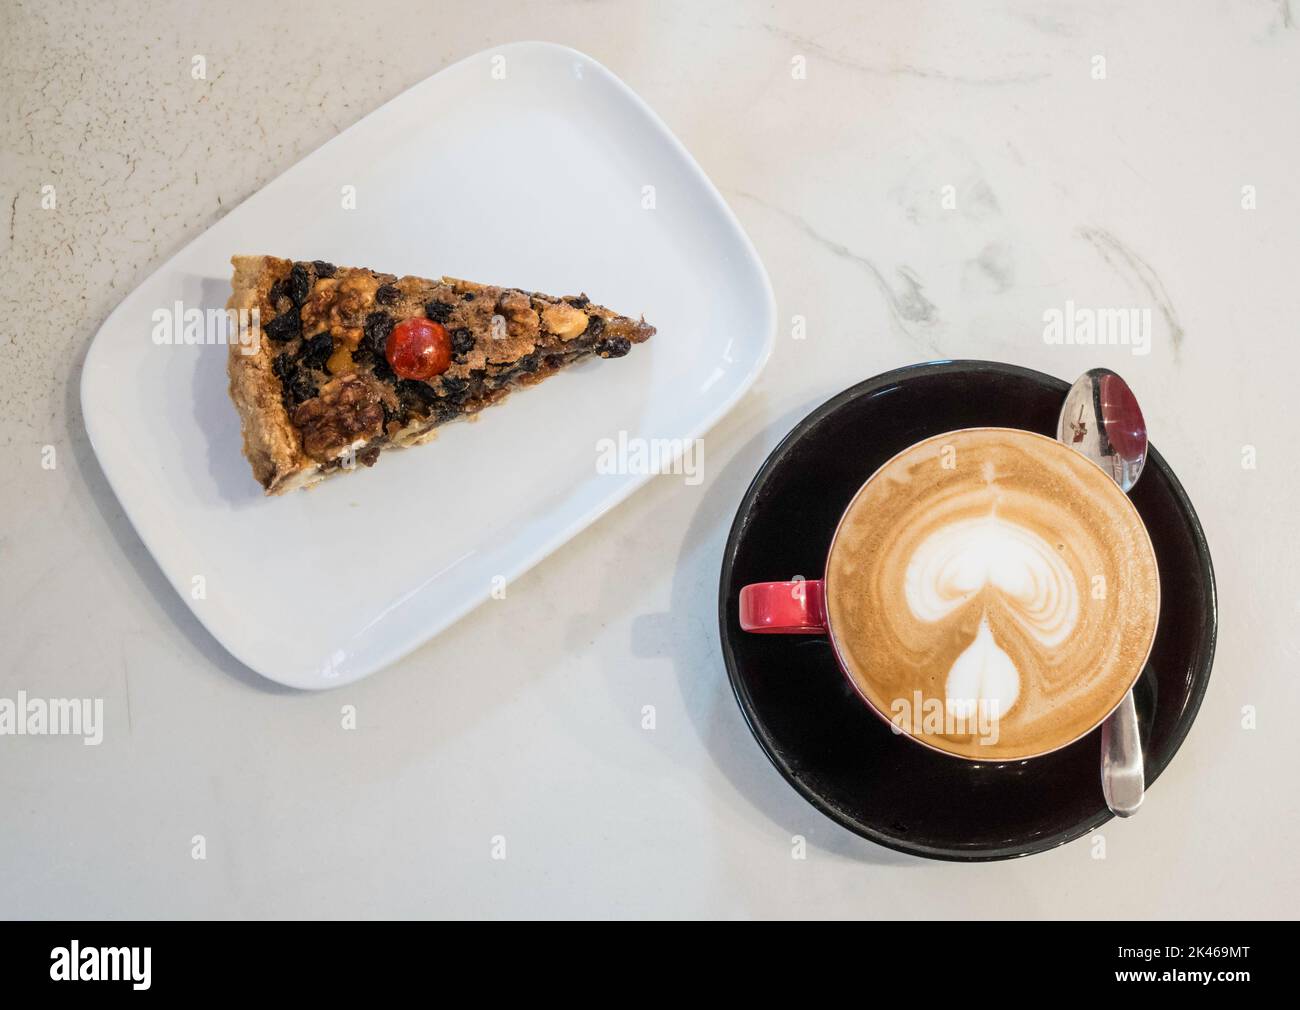 A slice of Ecclefechan Tart on a white plate with a cup of coffee Stock Photo